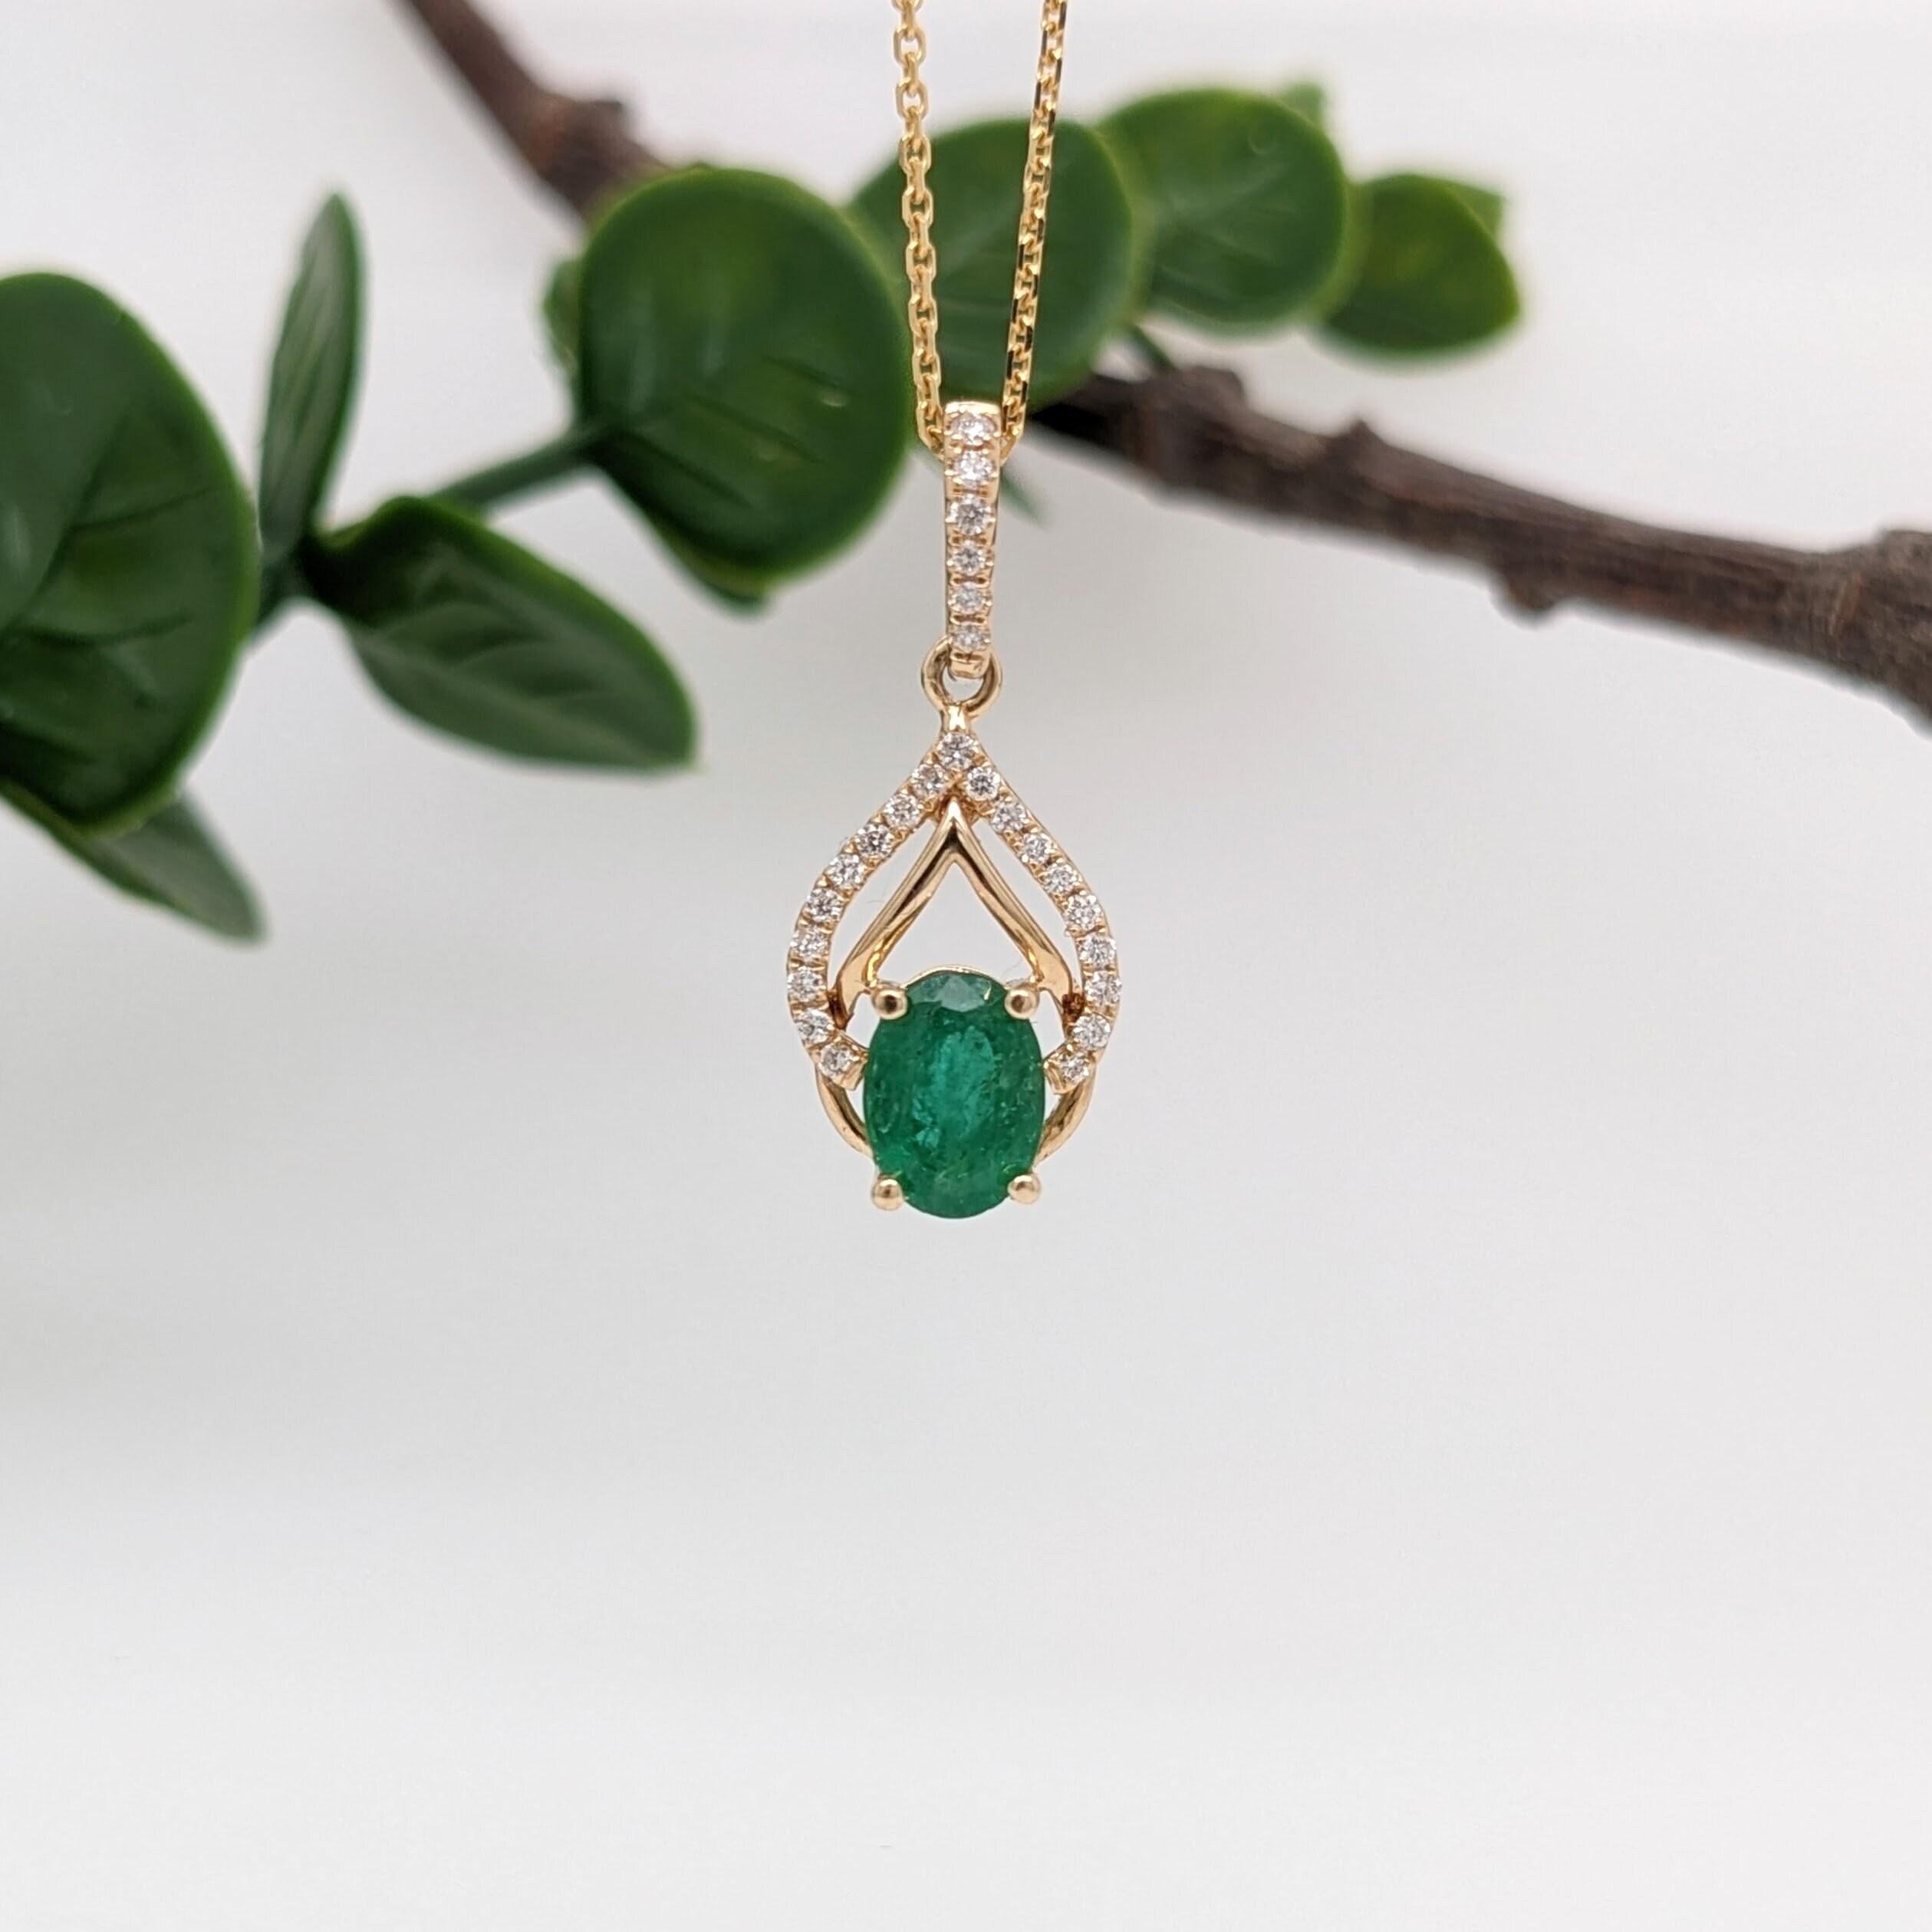 Emerald Pendant w Earth Mined Diamonds in Solid 14K Yellow Gold Oval 7x5mm